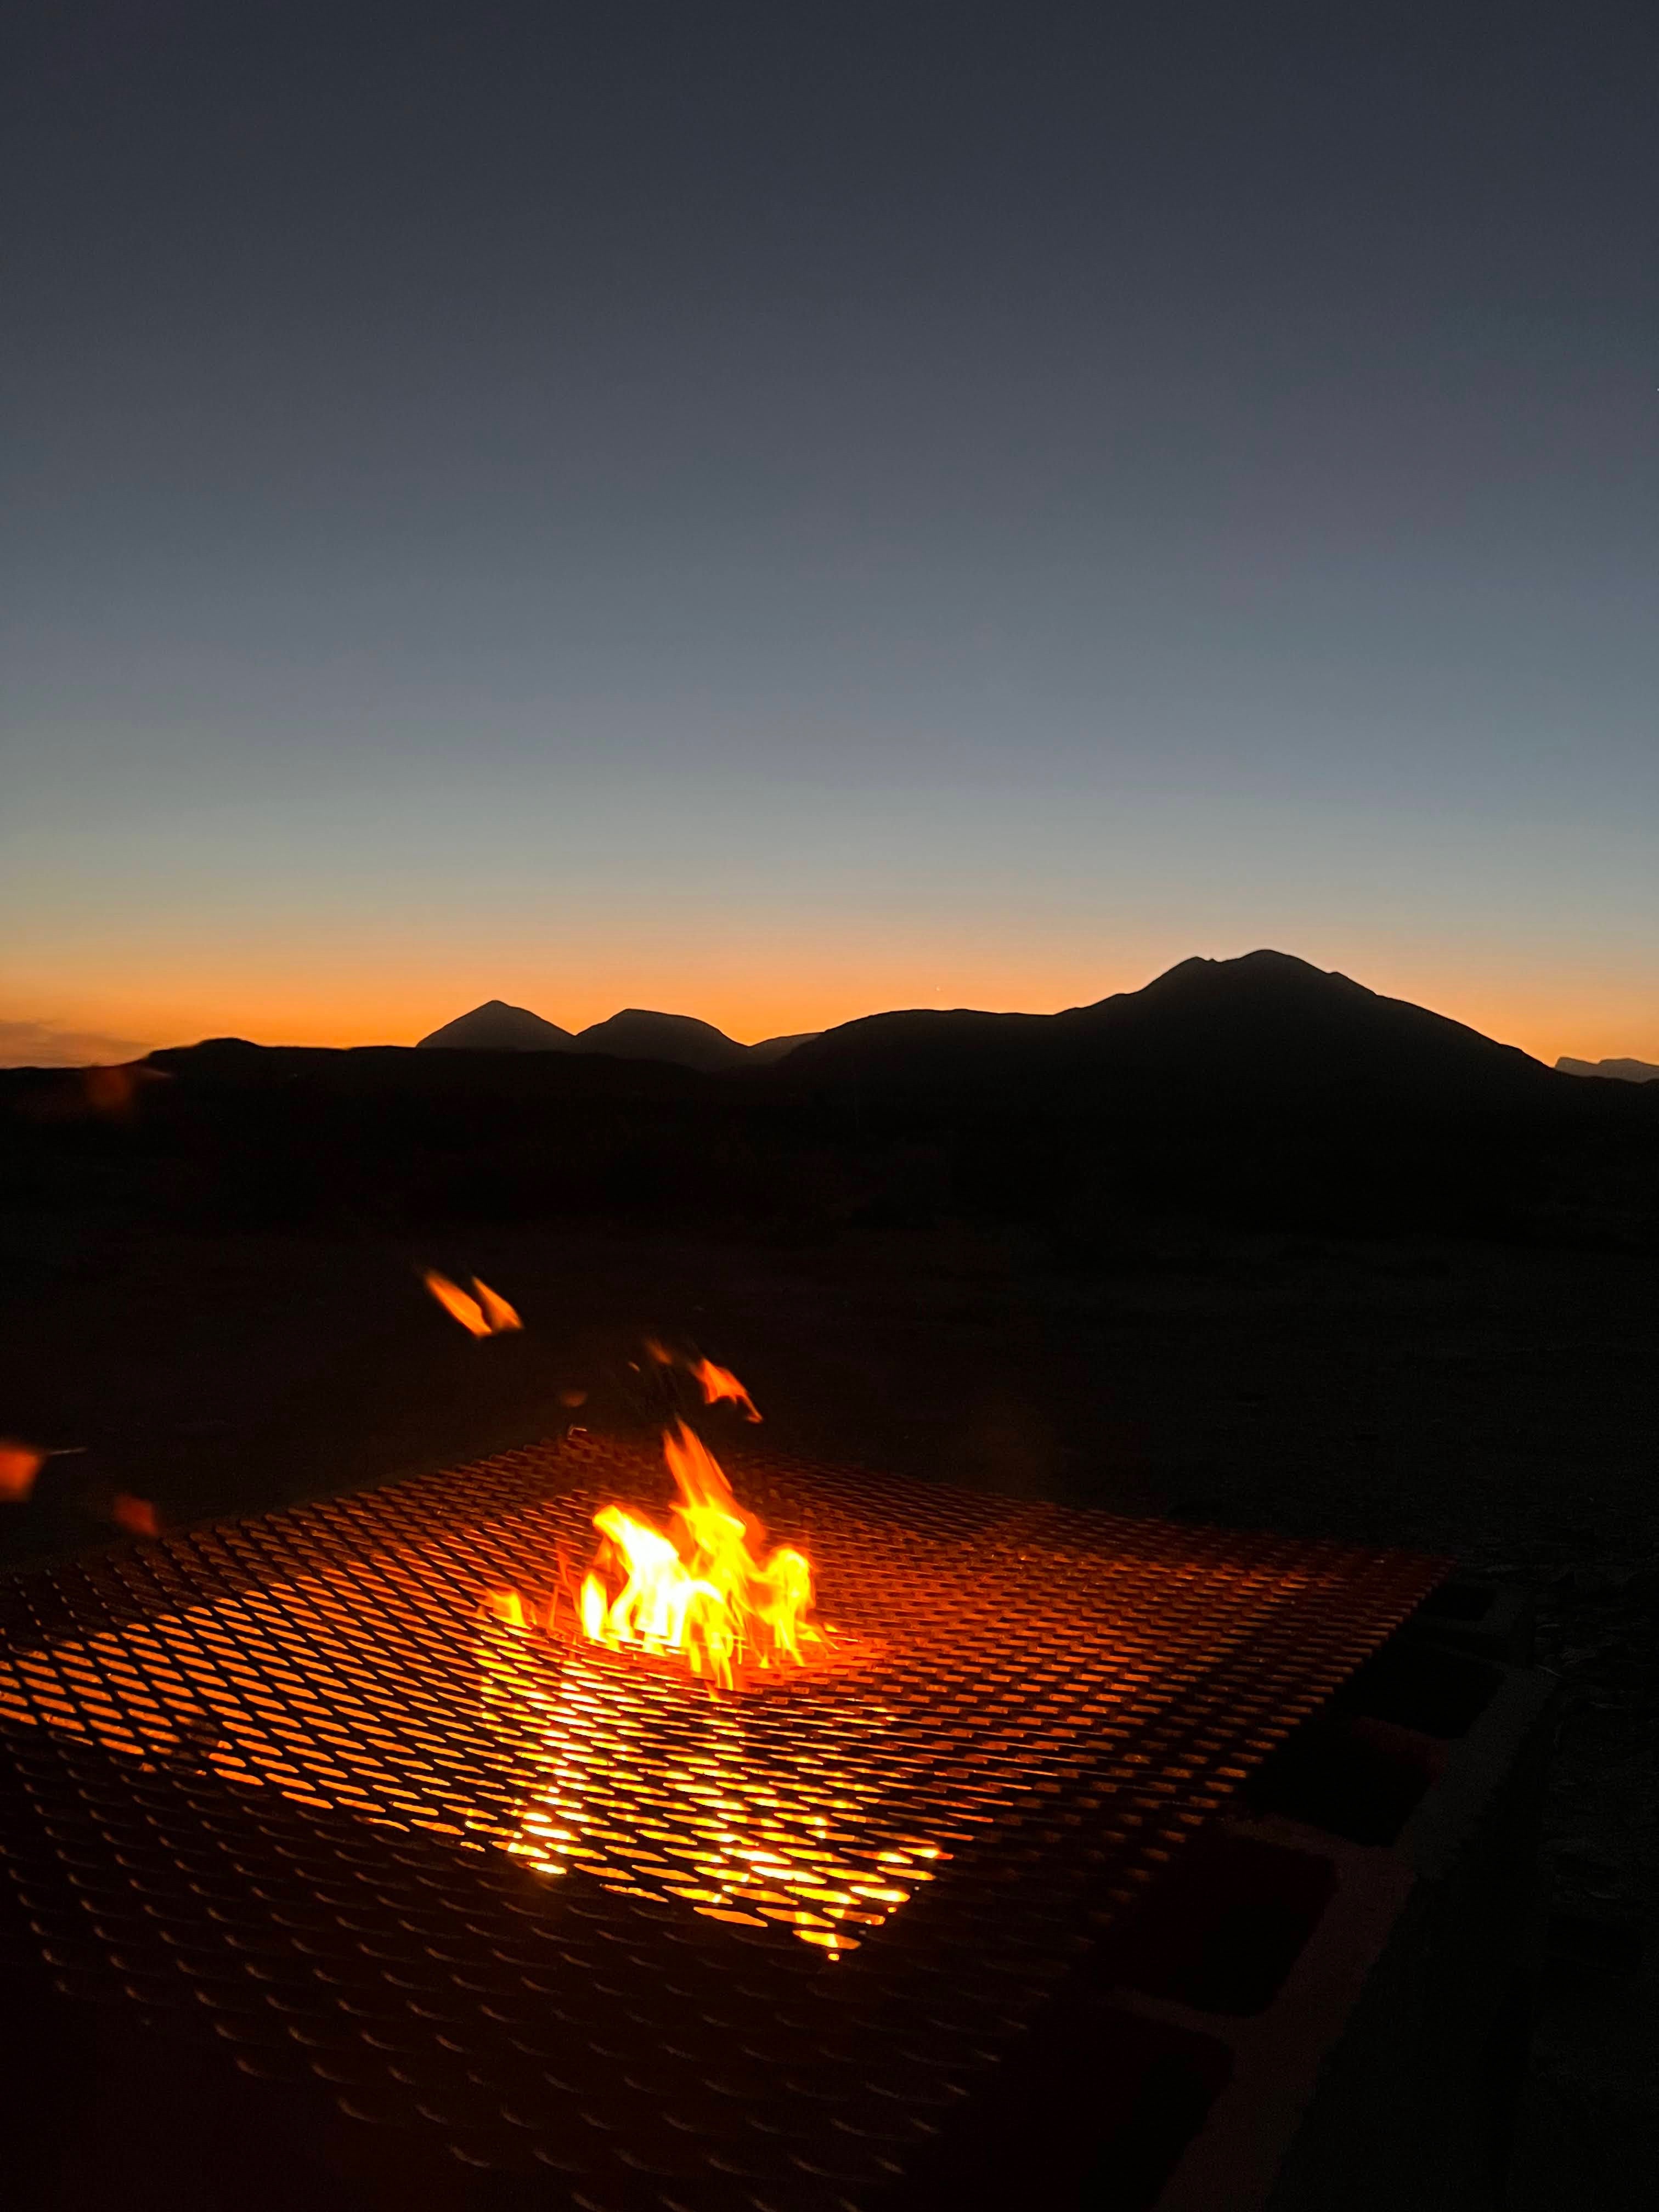 Camper submitted image from Sky Ranch Terlingua - 3